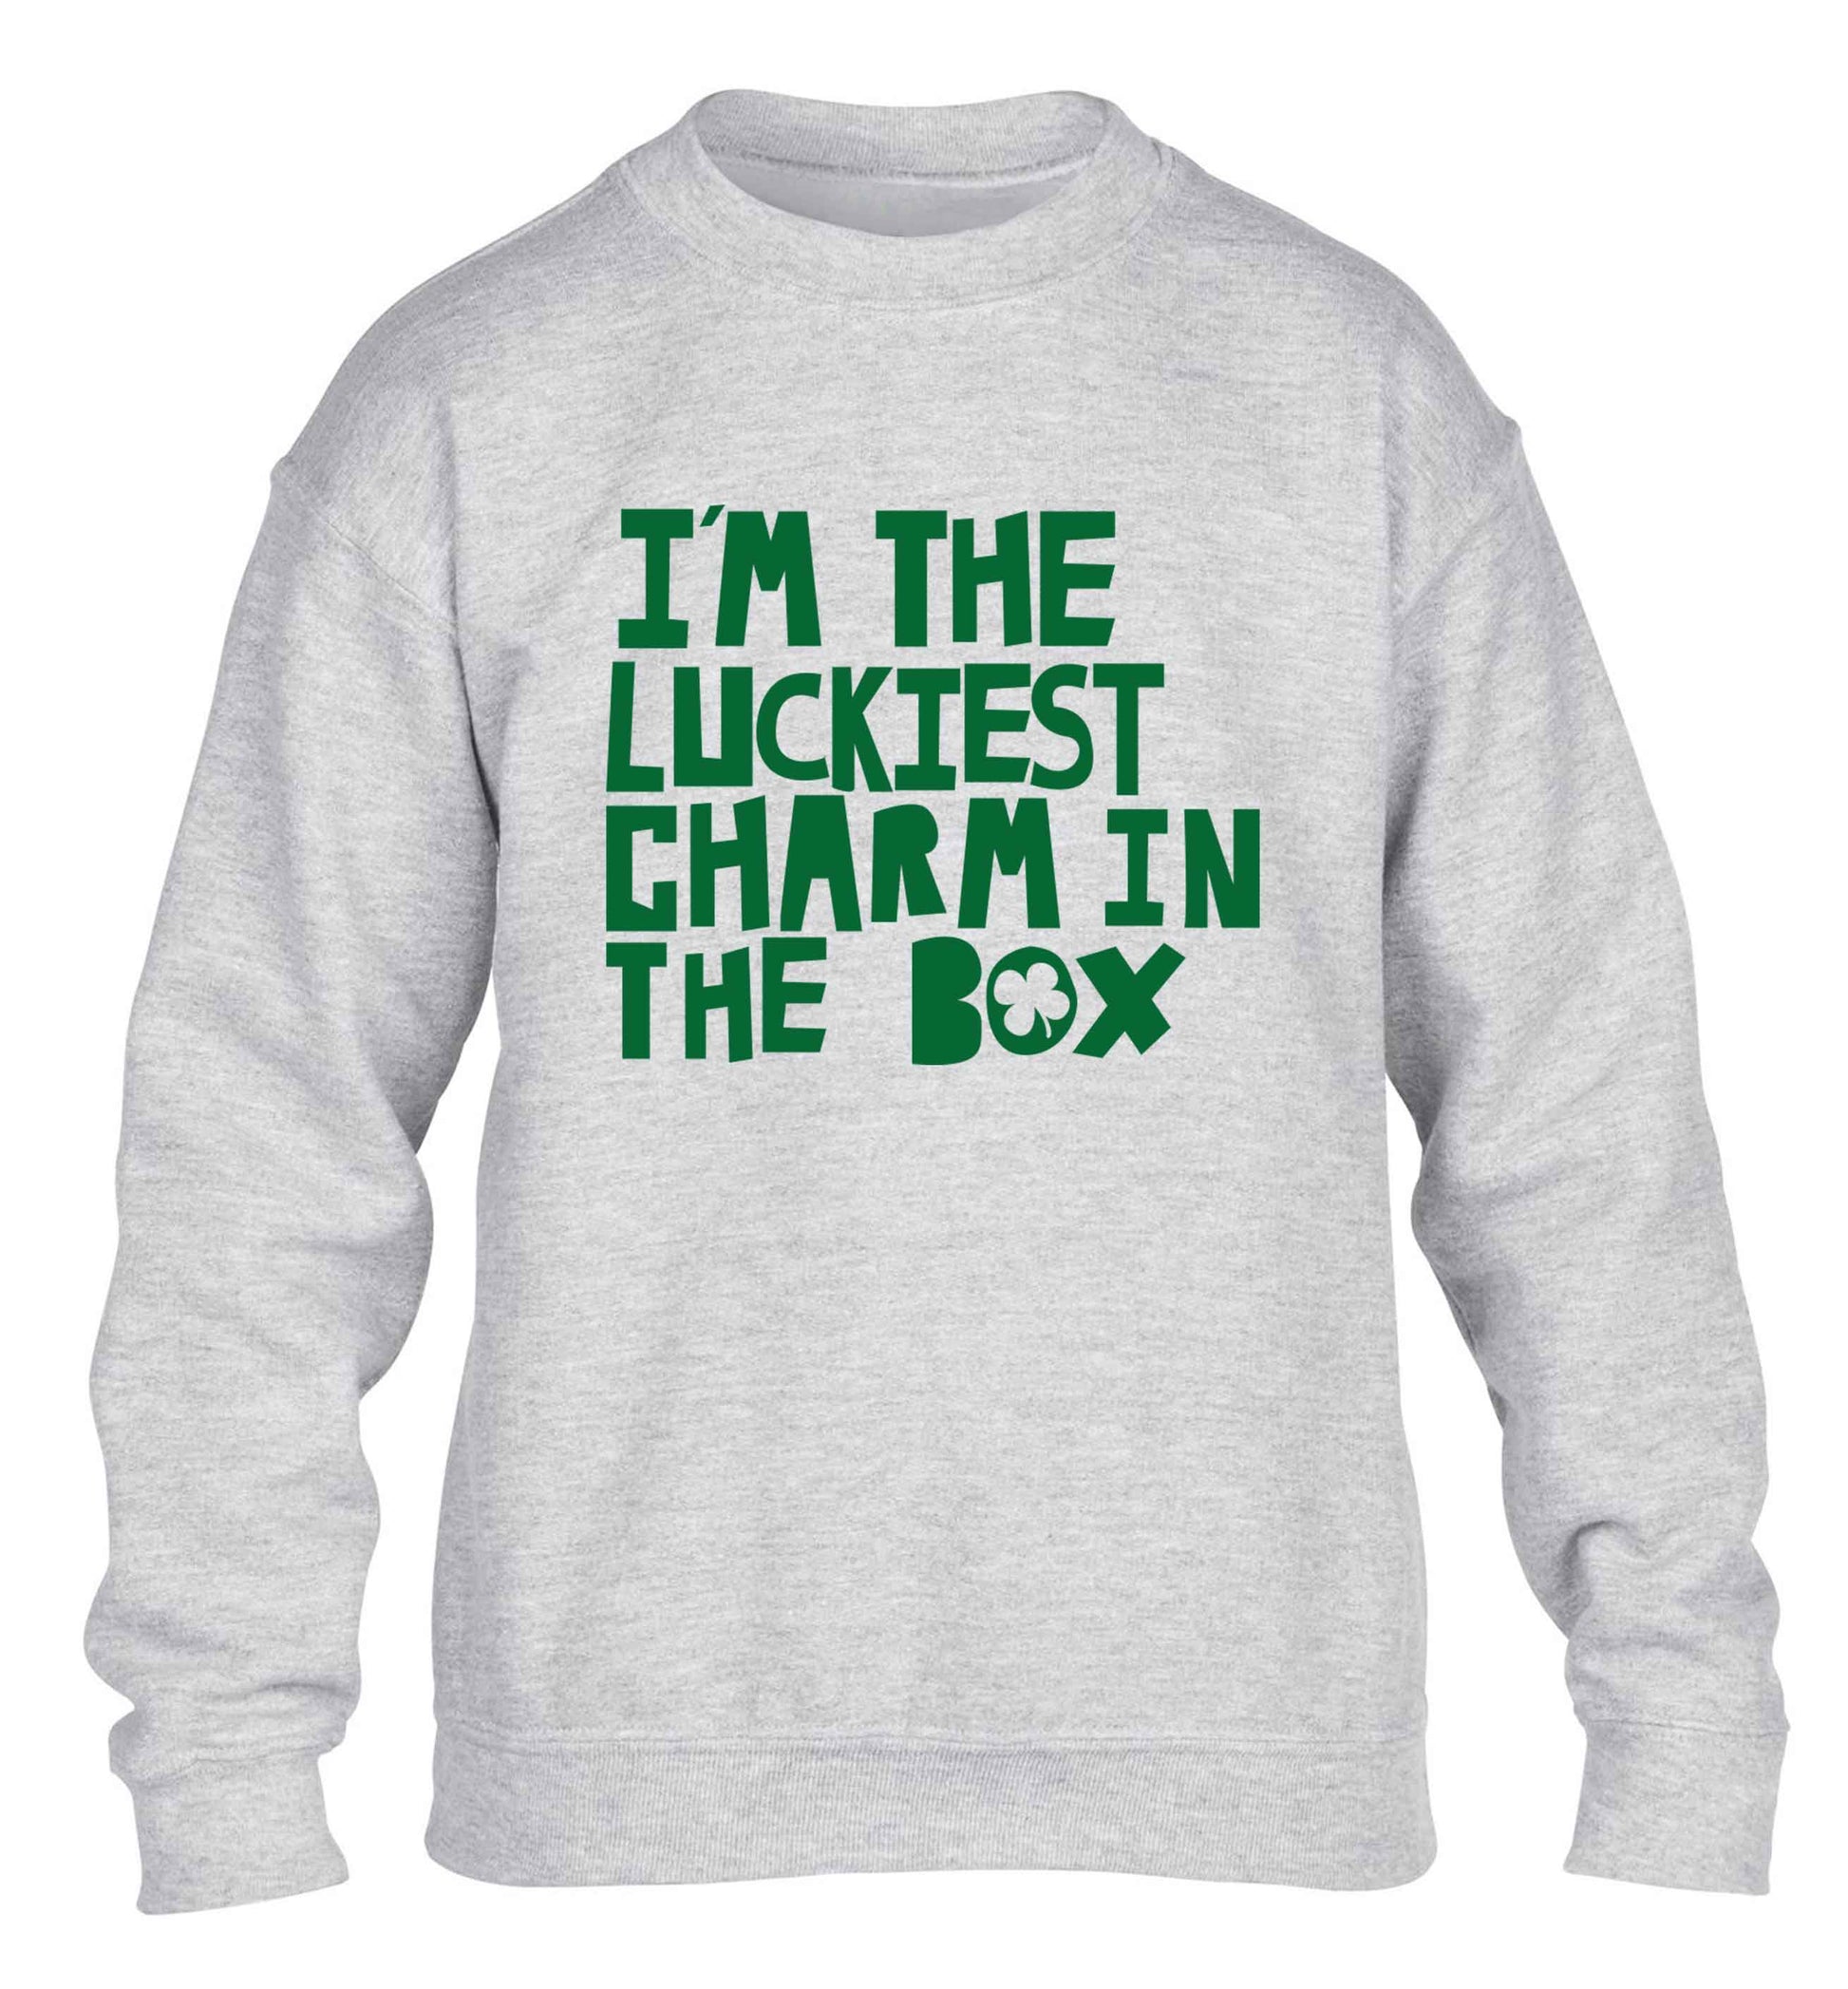 I'm the luckiest charm in the box children's grey sweater 12-13 Years